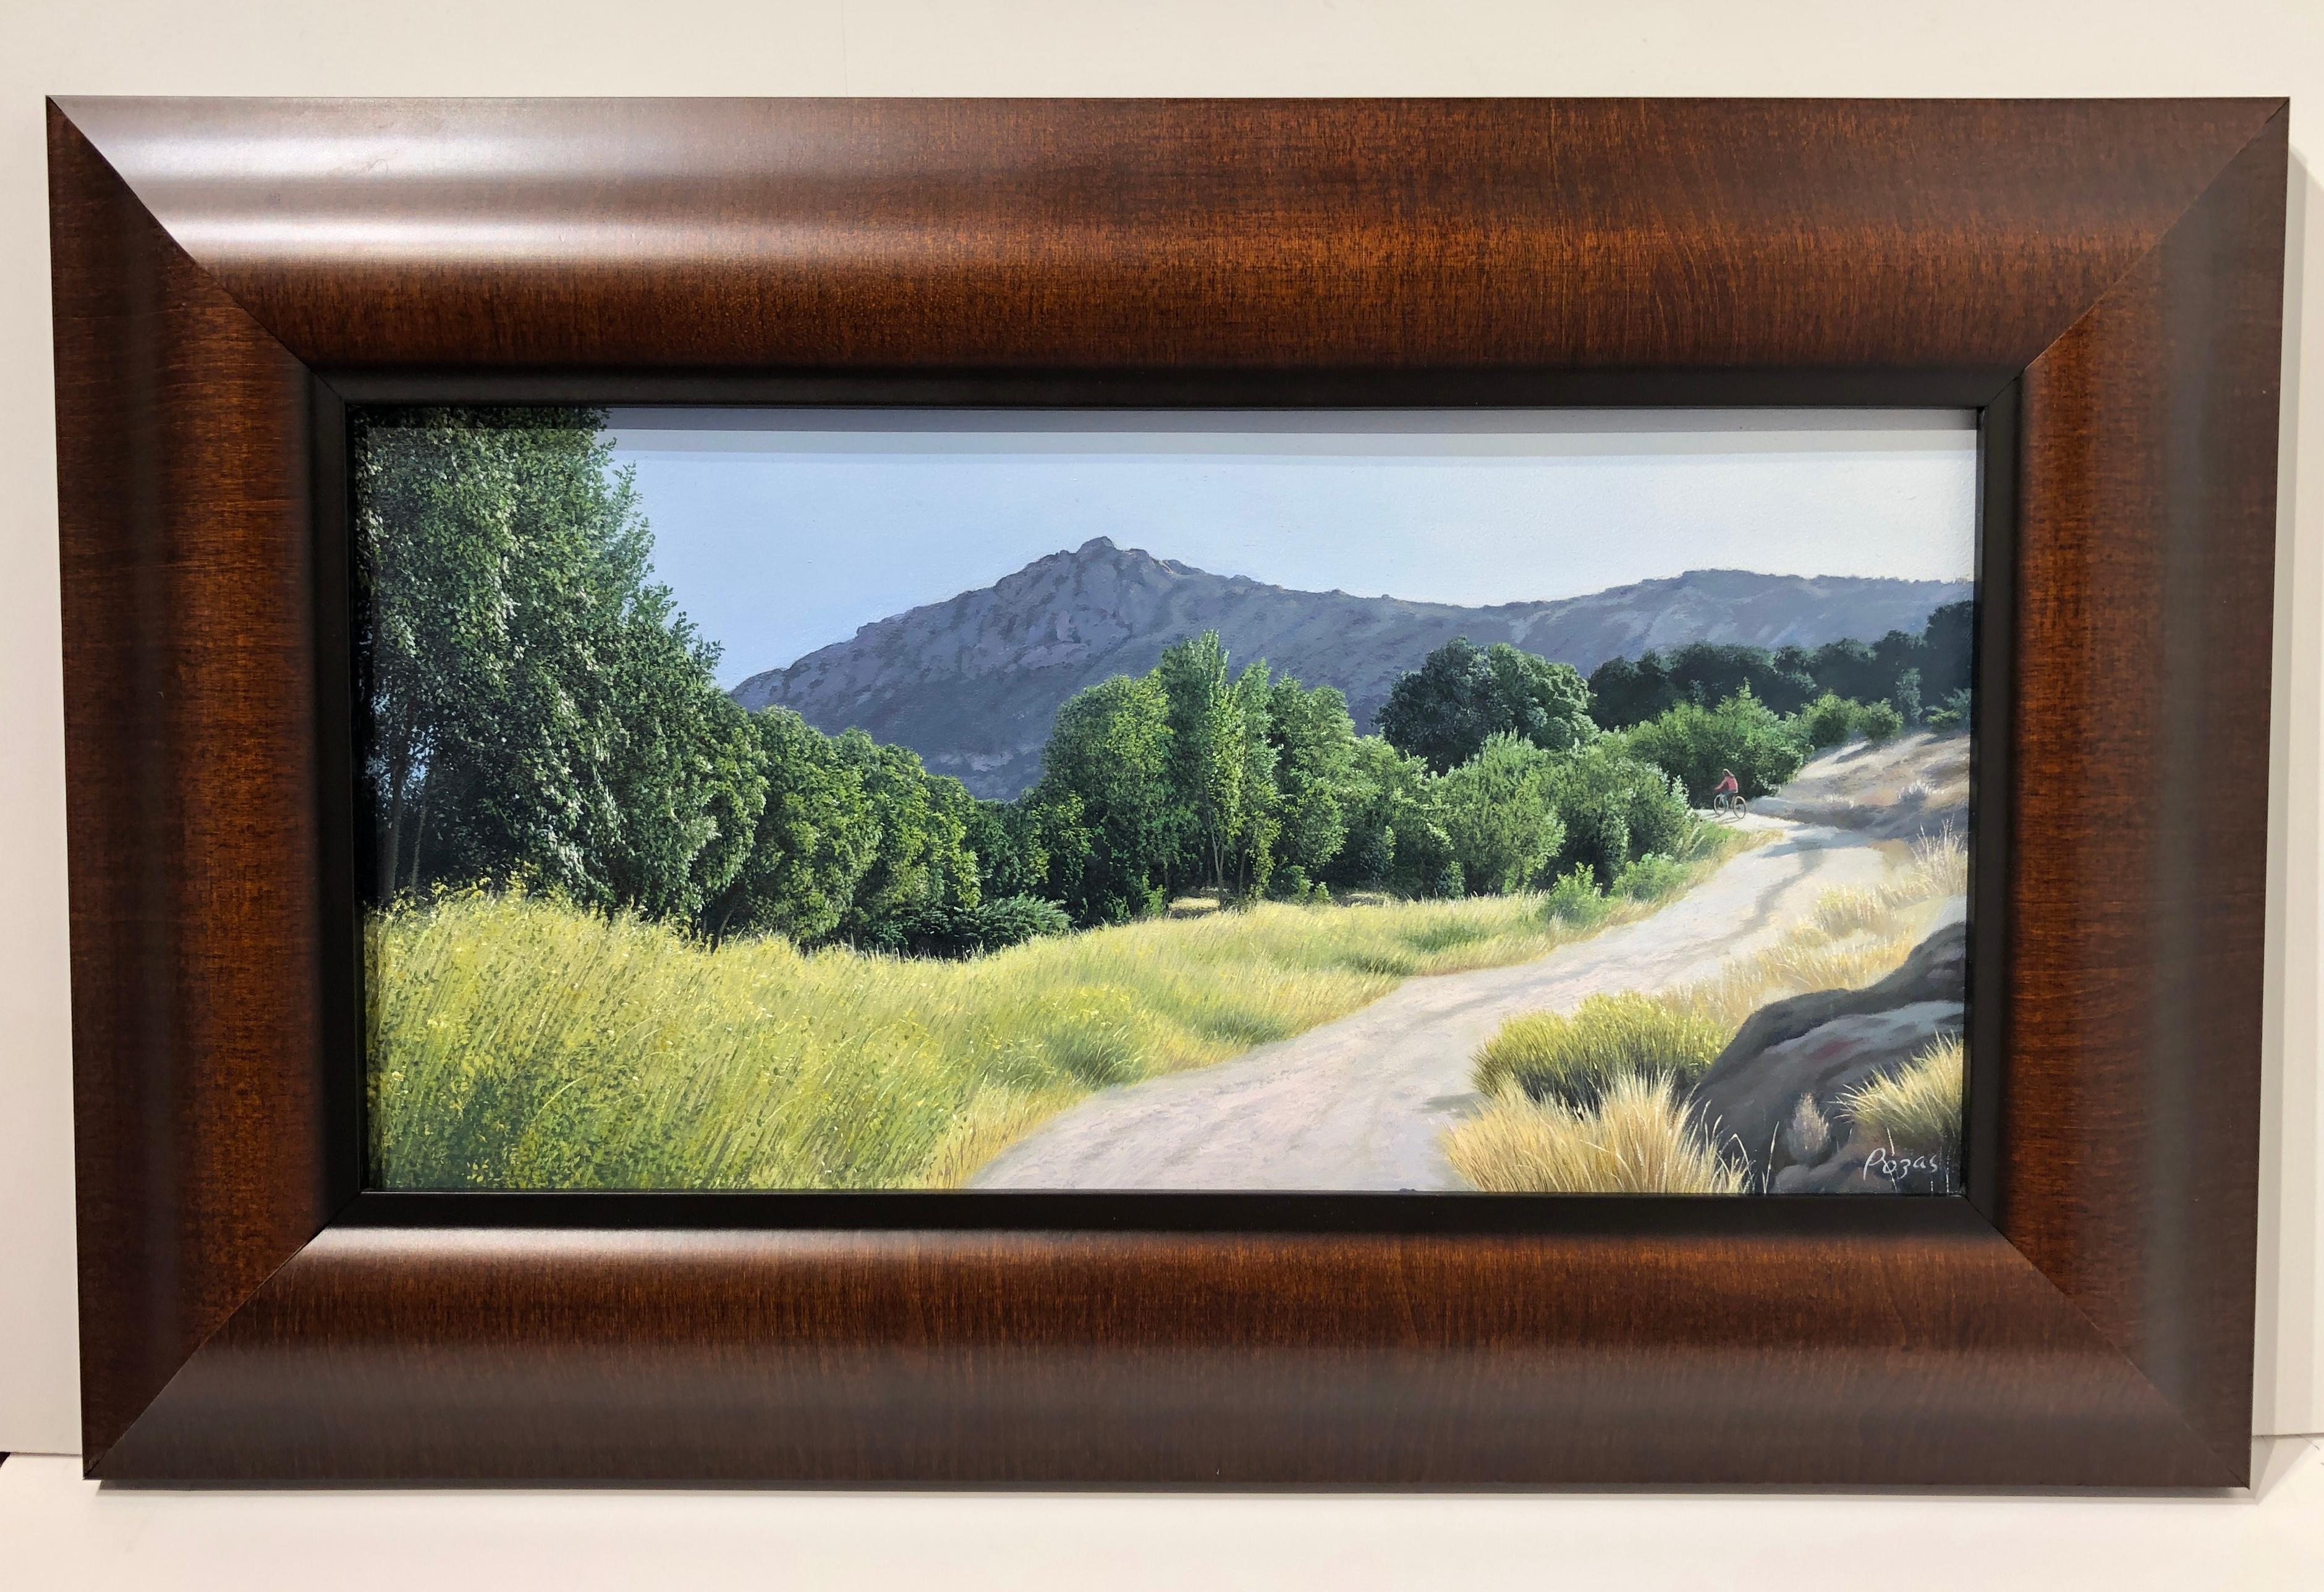  My Space - Highly Detailed Landscape with Path Leading into Dense Woods, Framed - Painting by René Monzón Relova “Pozas”